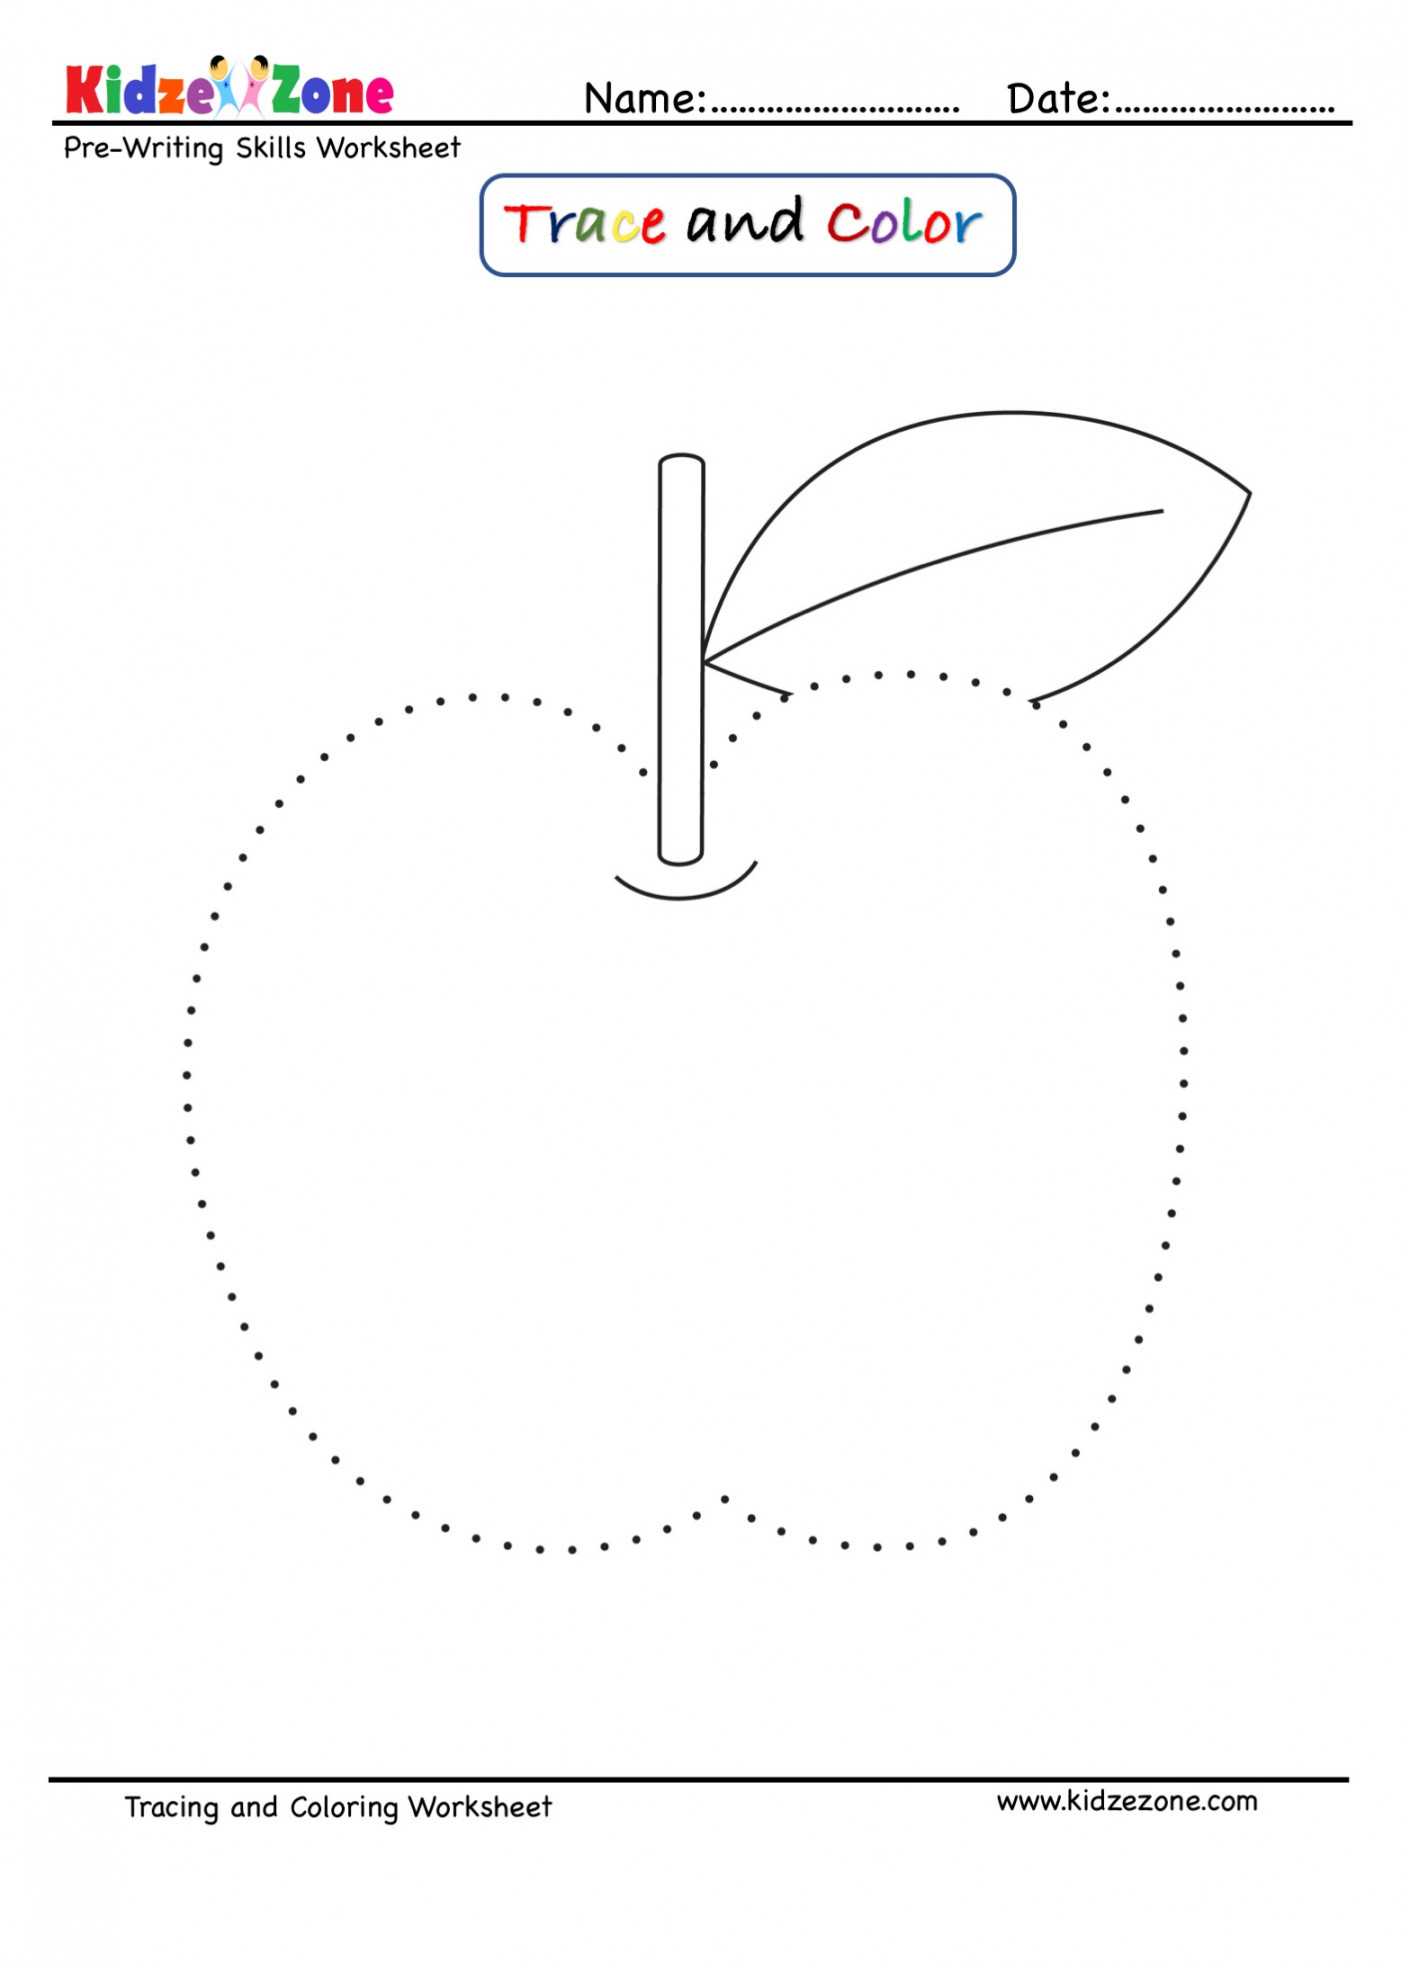 Apple Tracing and Coloring Worksheet - KidzeZone